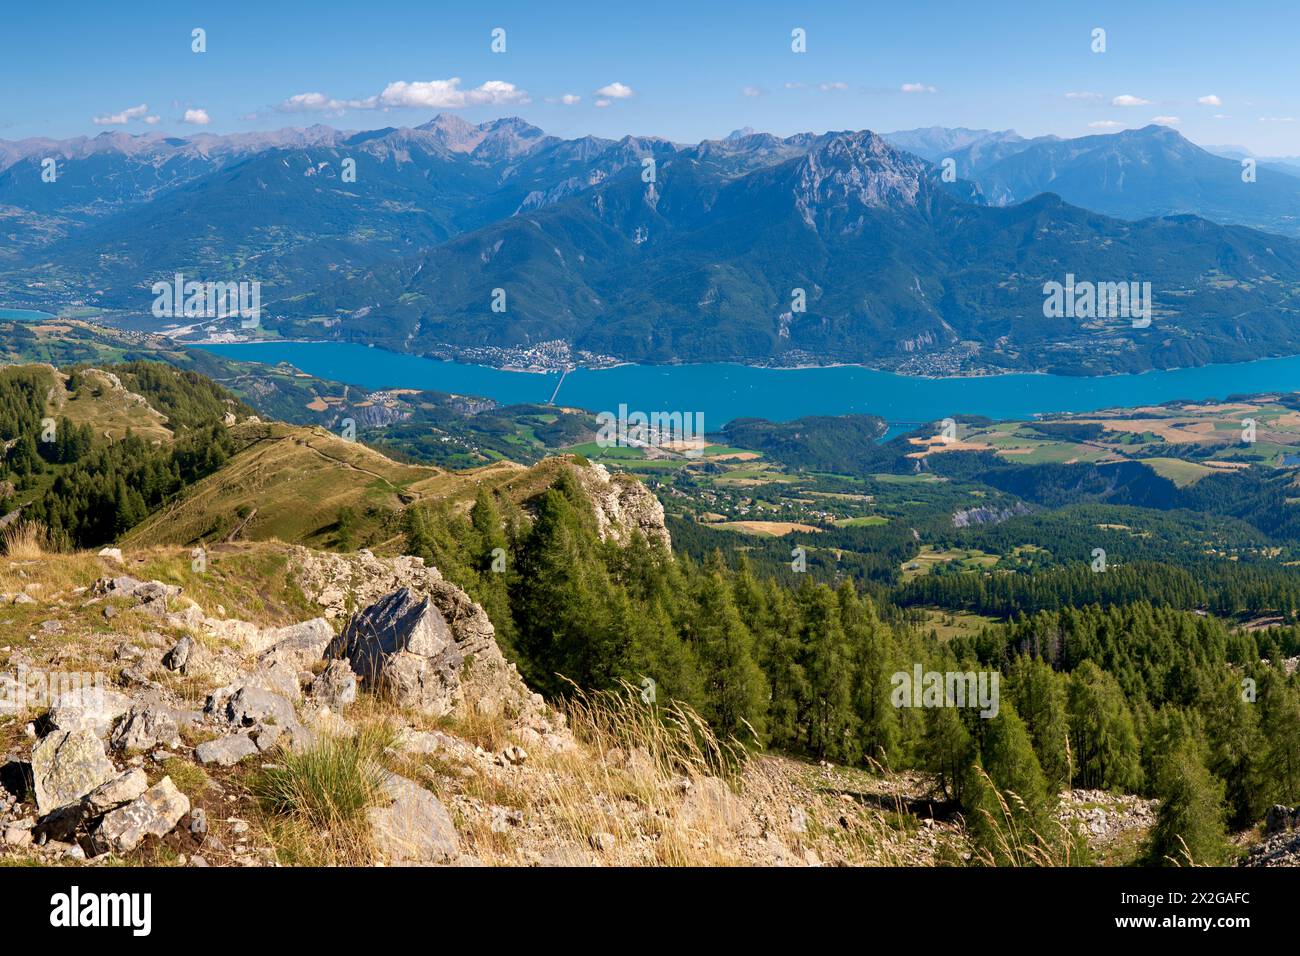 Serre-Poncon lake, Savines-le-Lac village and Grand Morgon peak from Ecrins National Park. Durance Valley, Hautes-Alpes (Alps). France Stock Photo